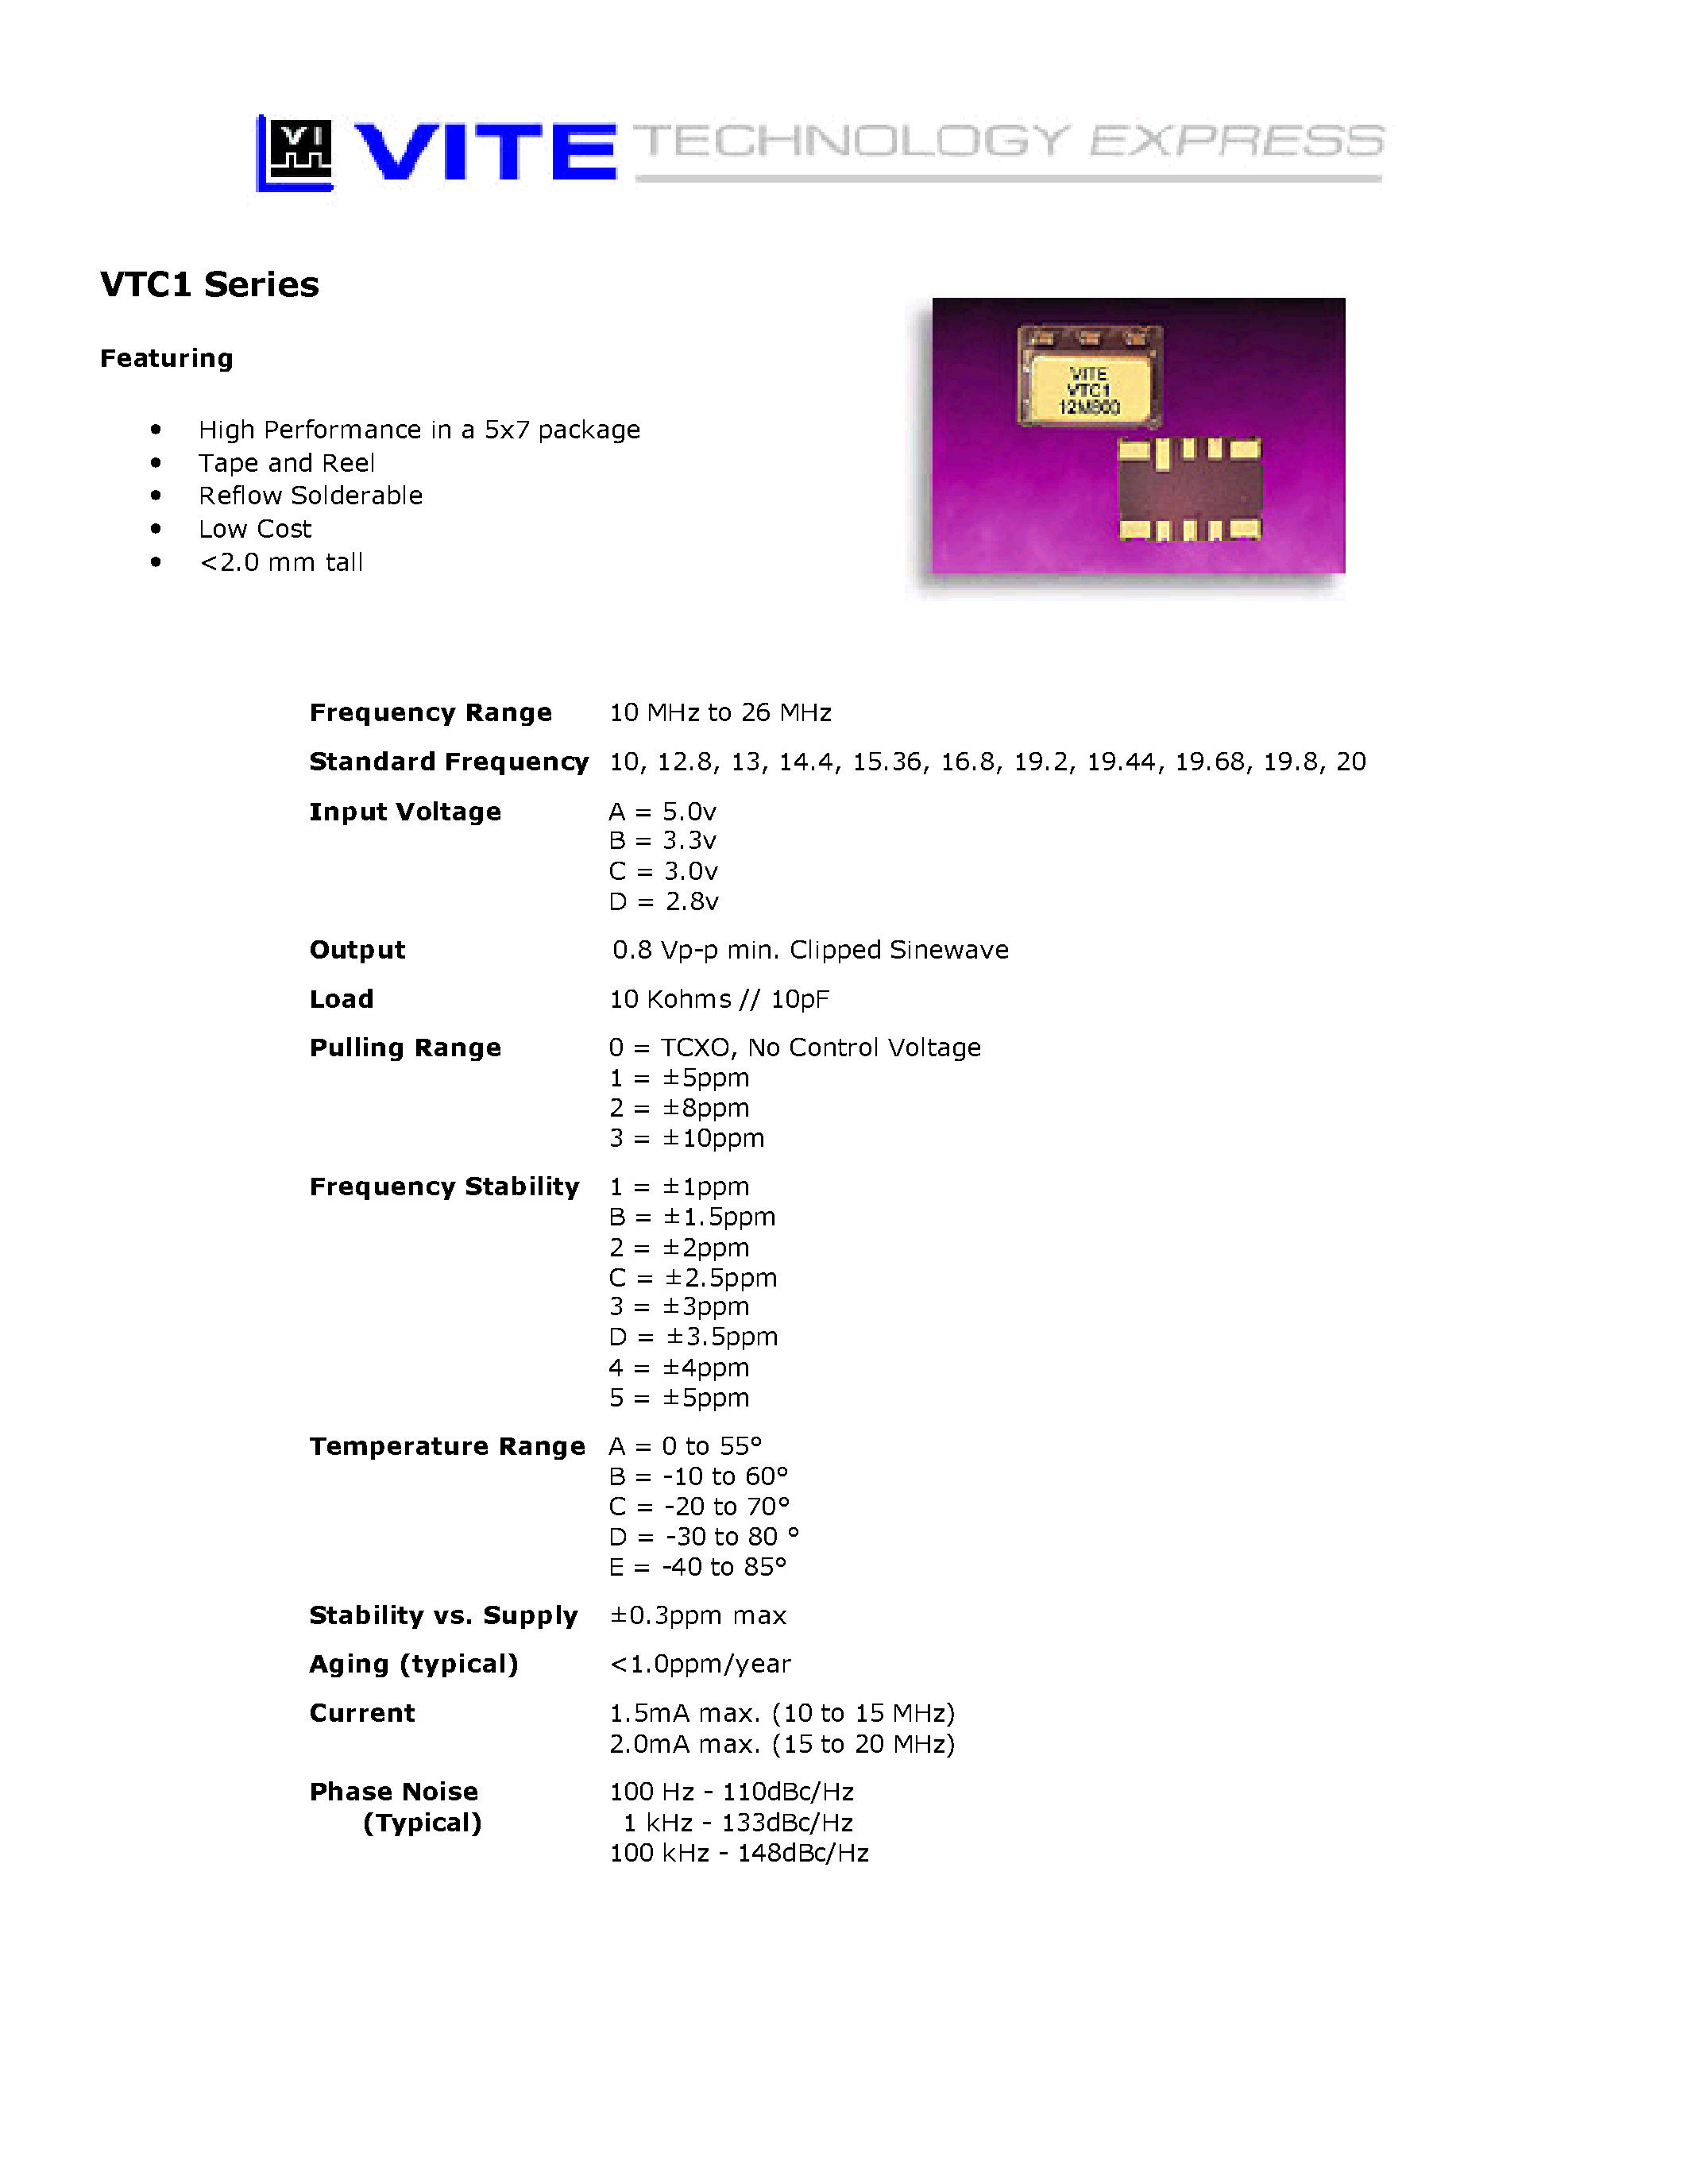 Datasheet VTC1 - High Performance in a 5x7 package page 1